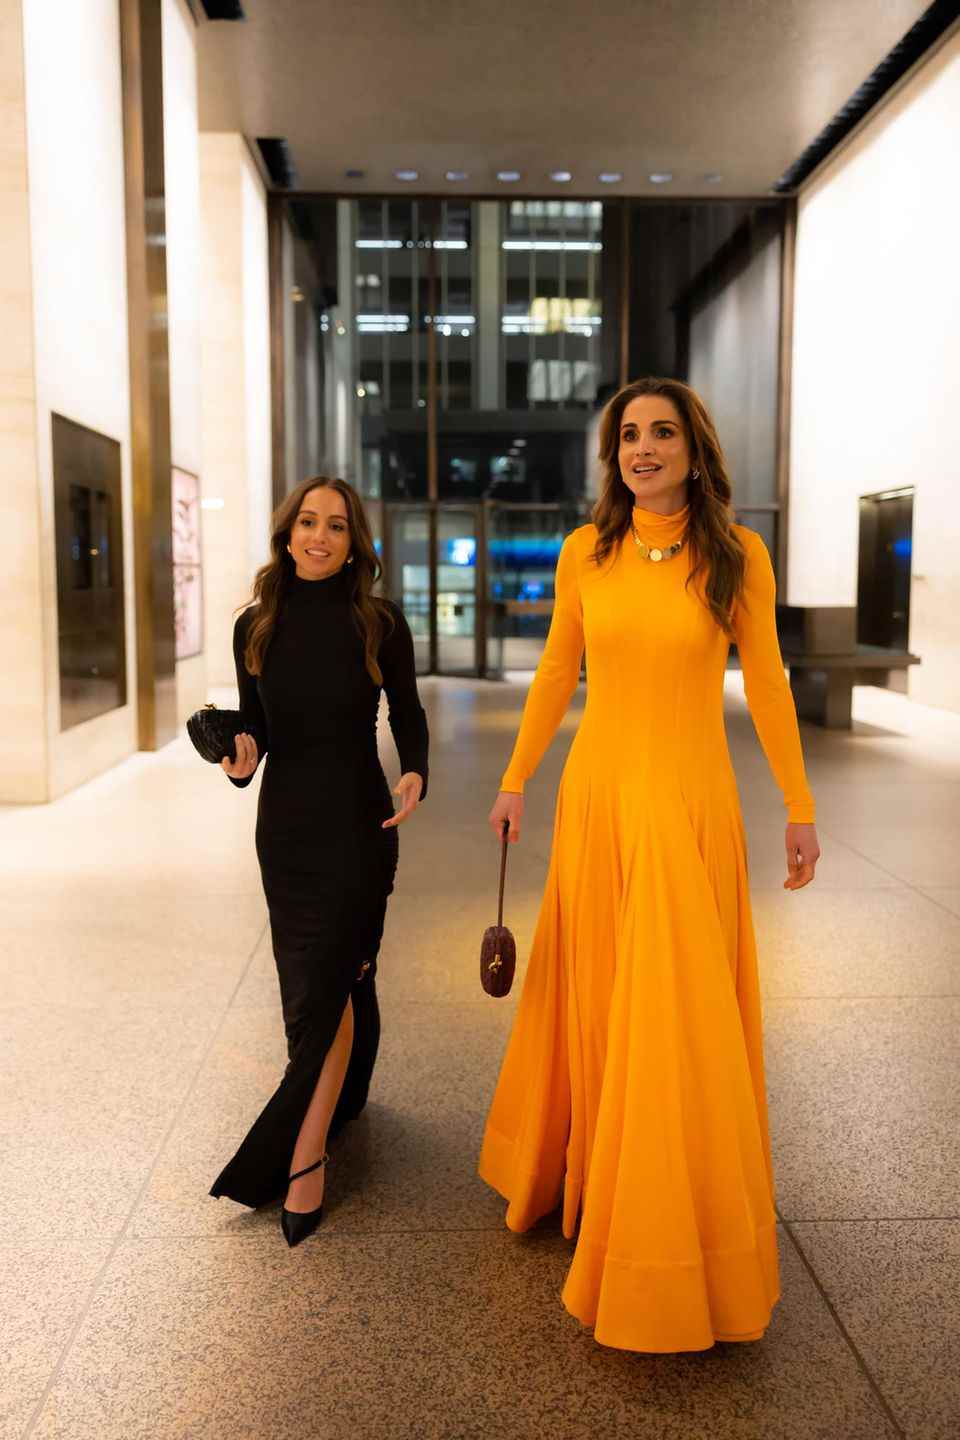 Queen Rania with her daughter, Princess Iman, on the way to "Caring for Women Dinner" the "Kering Foundation".